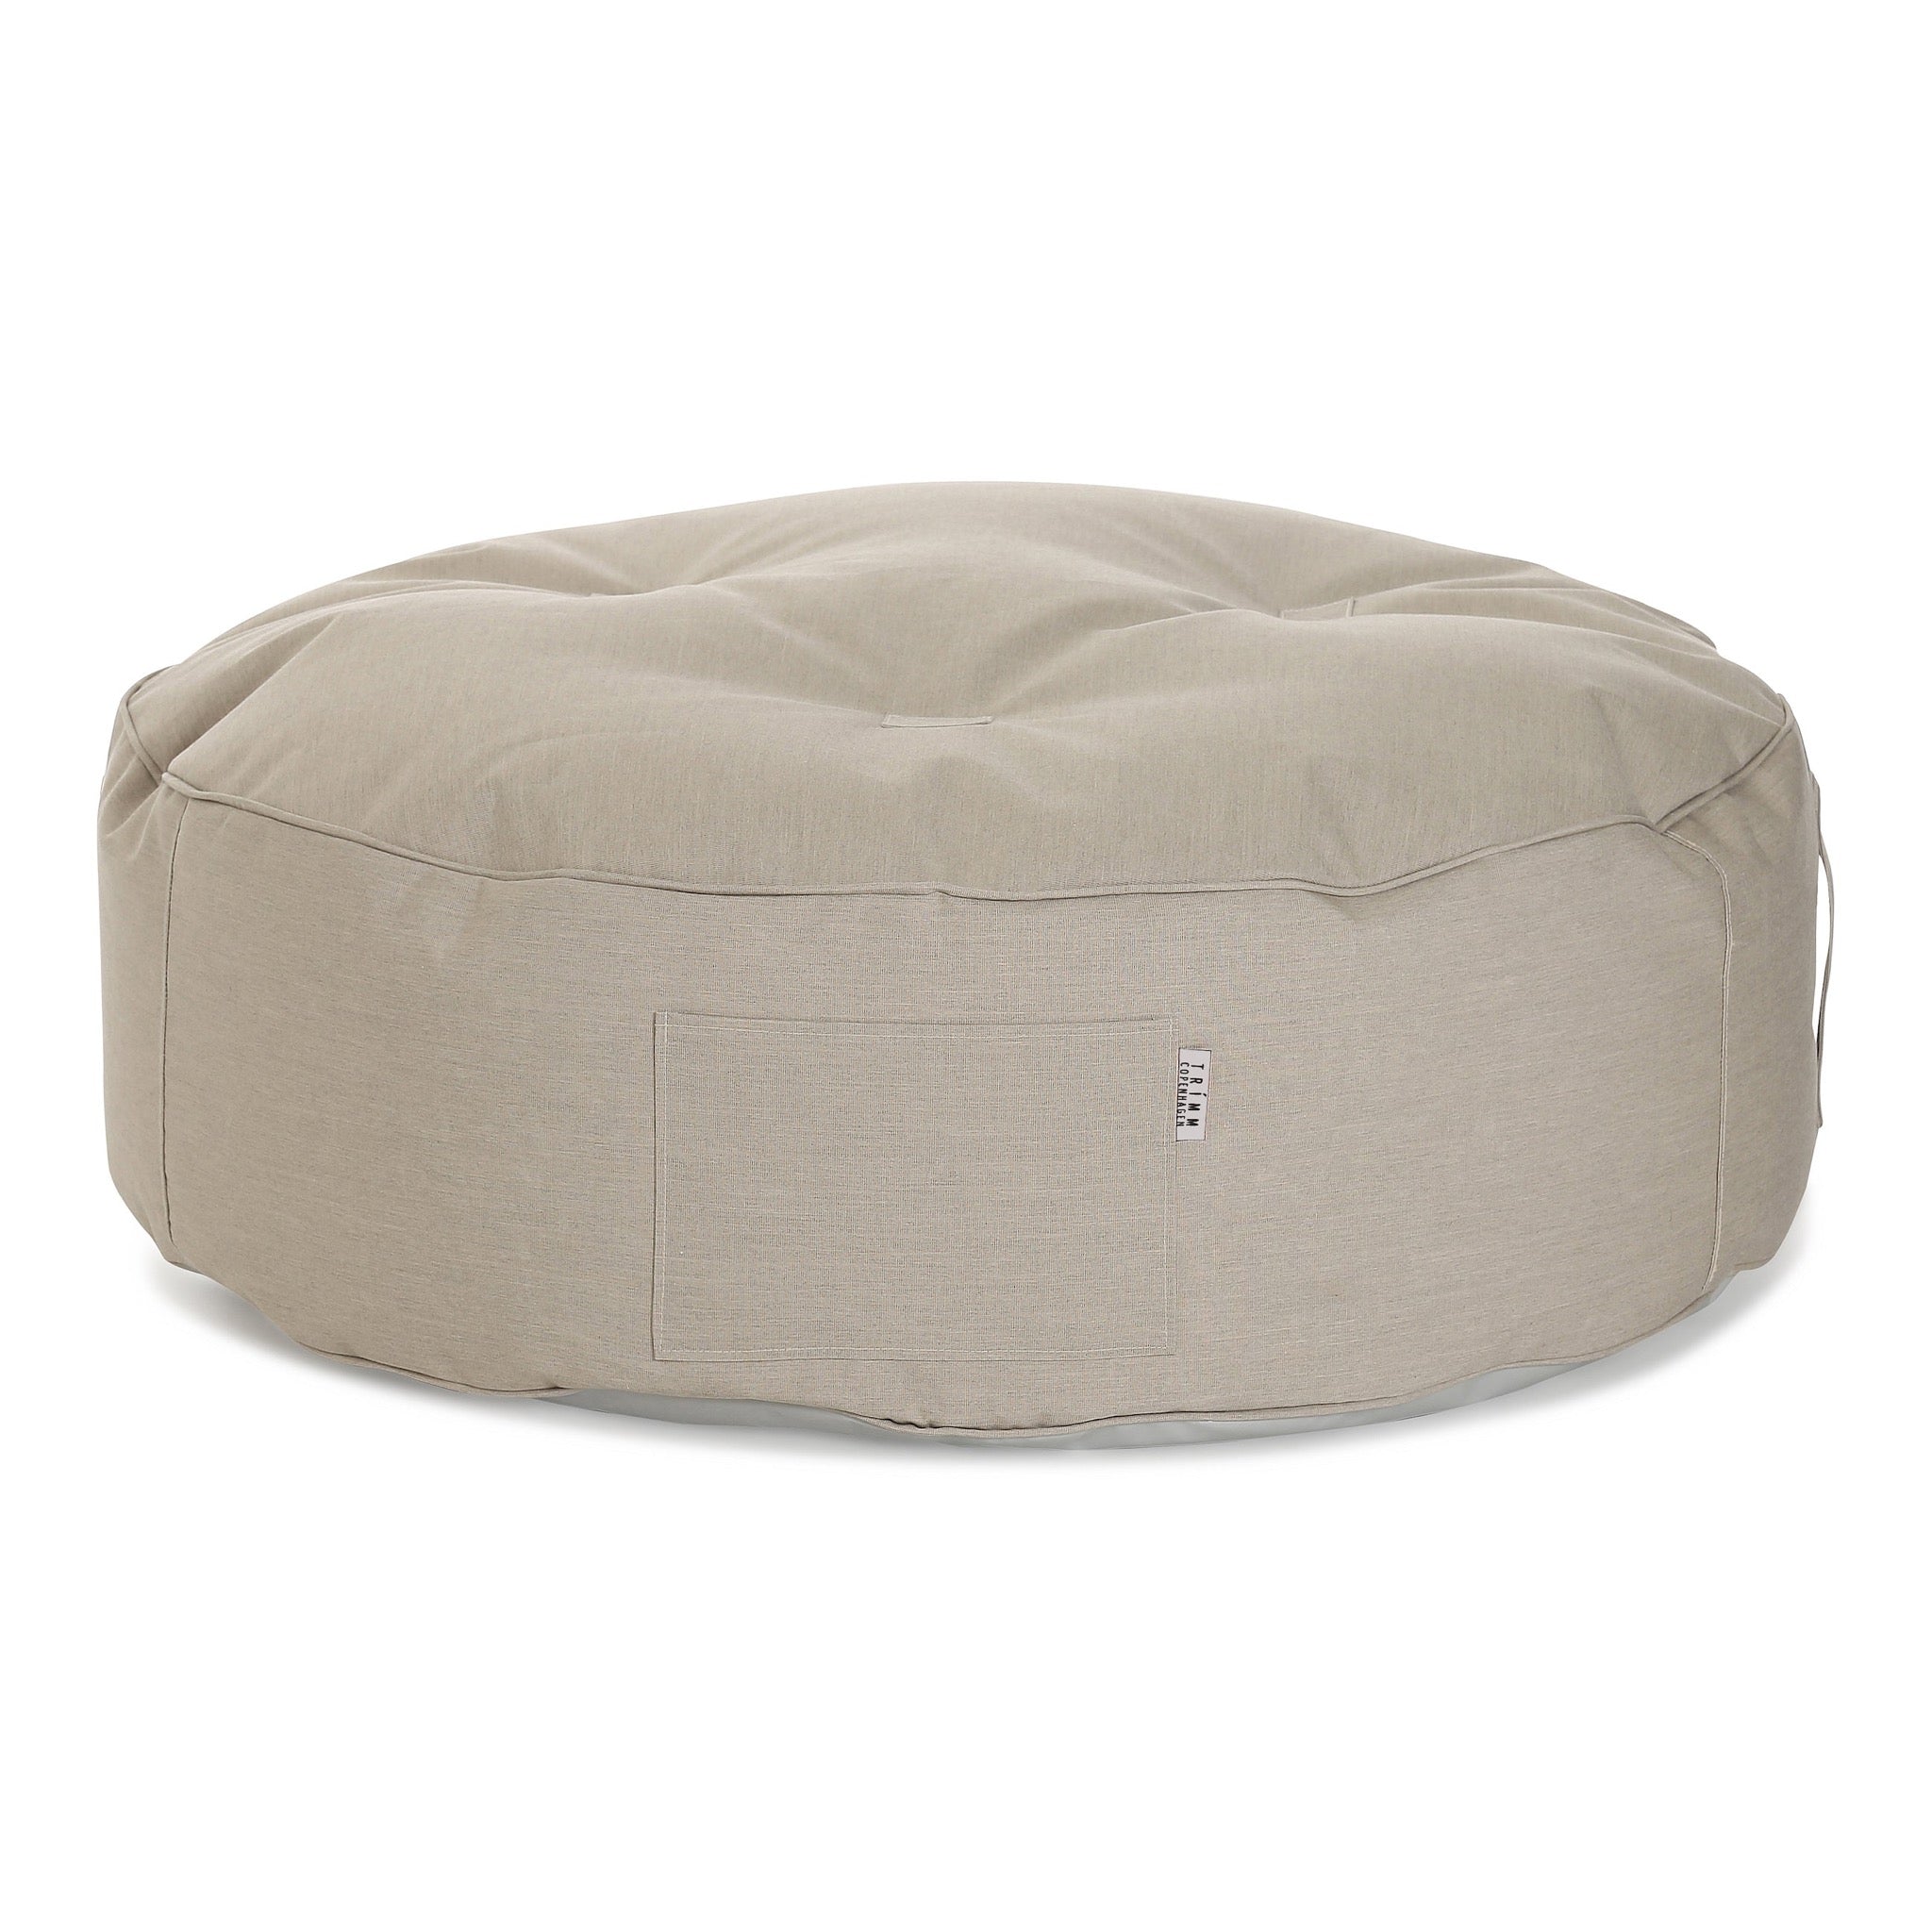 Full Moon Round Beanbag Pouff - By Trimm - Real Scandinavian Quality